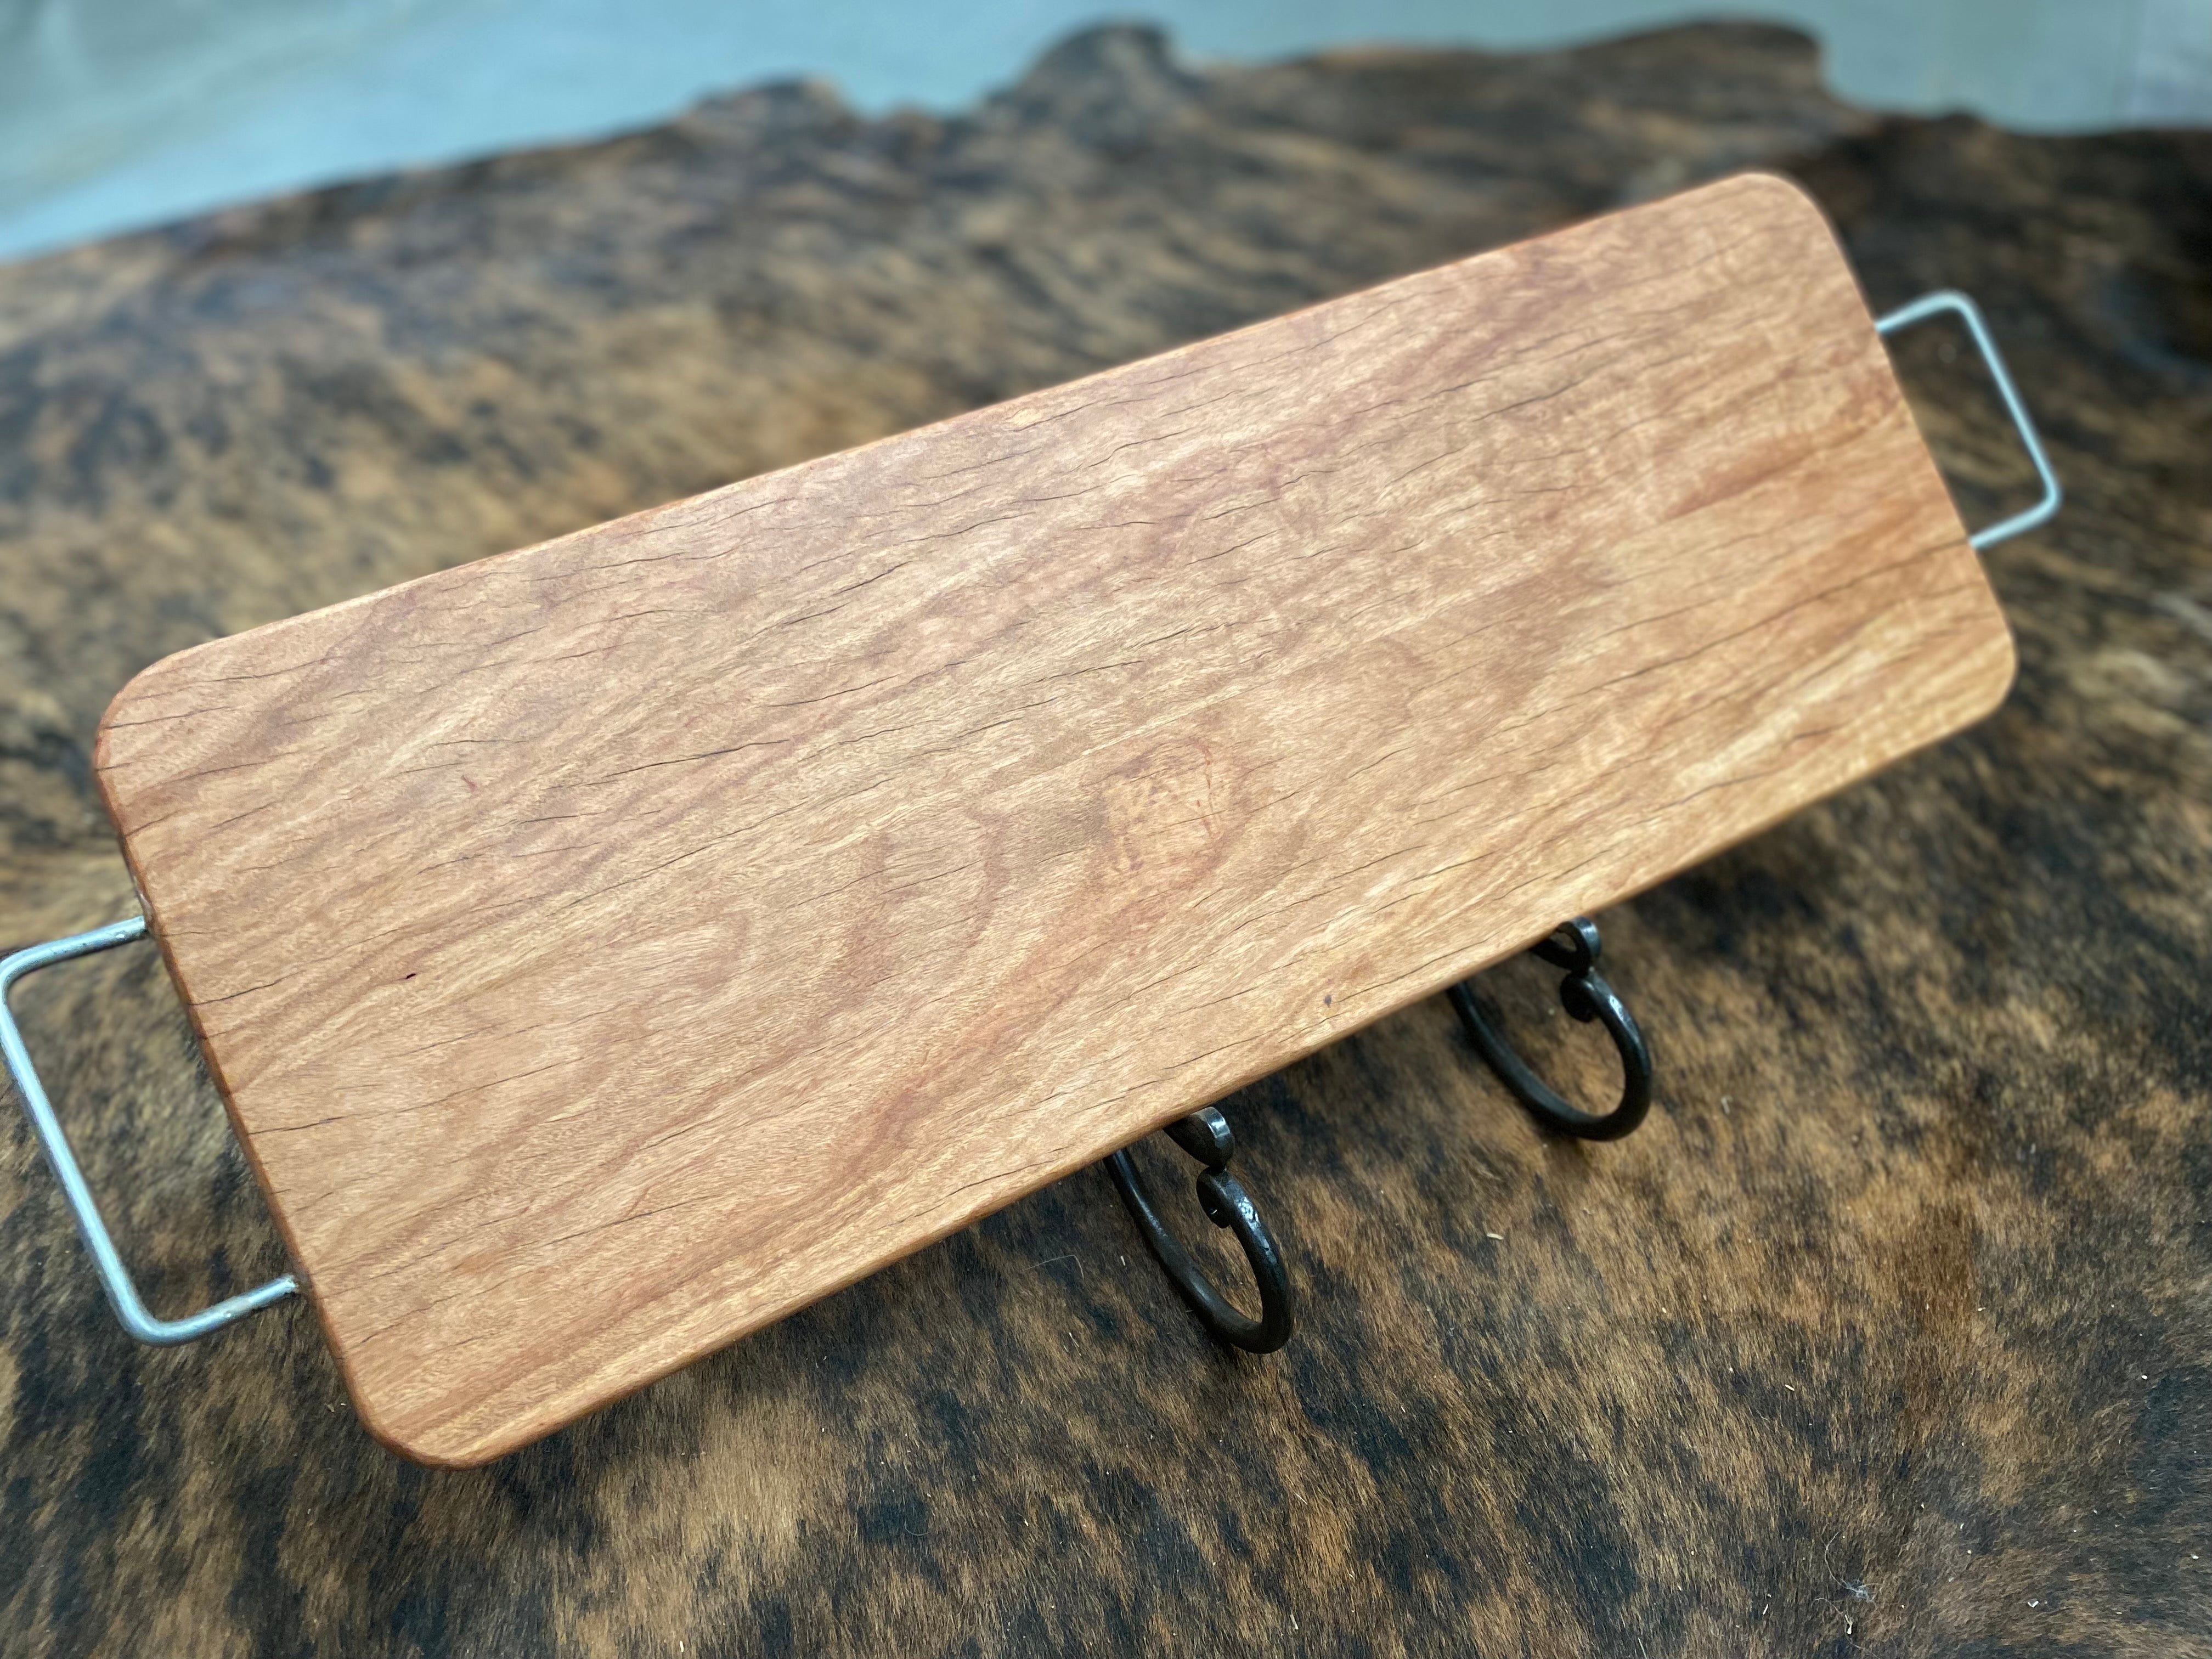 Handmade Timber GRAZING Board with handles